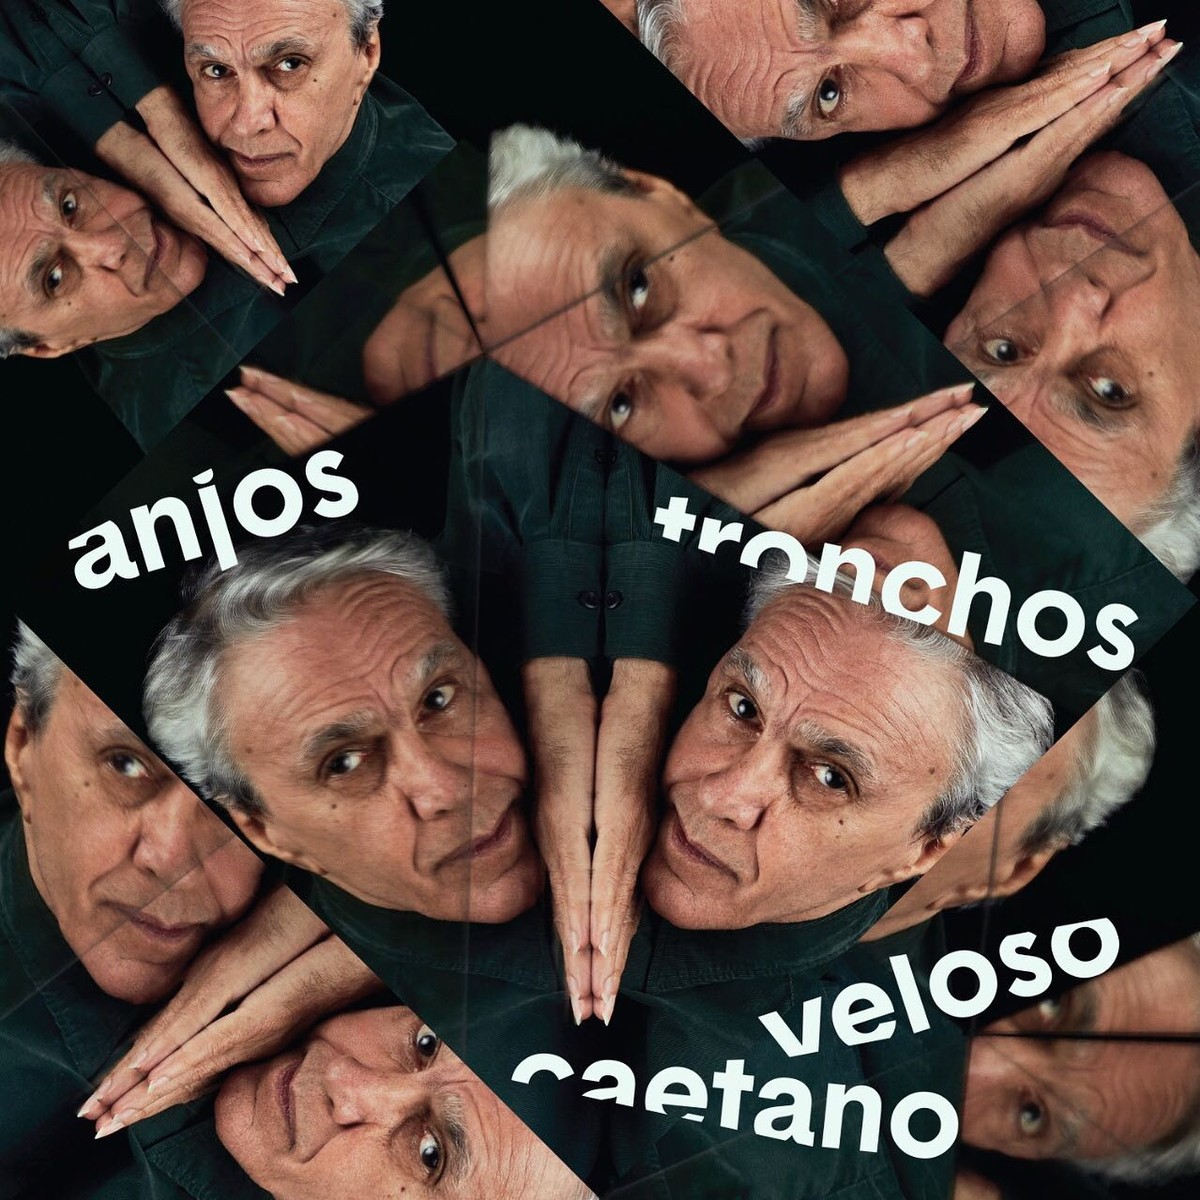 Caetano Veloso reveals the cover of 'Anjos tronchos', single with 'extremely dense song' | Mauro Ferreira's blog